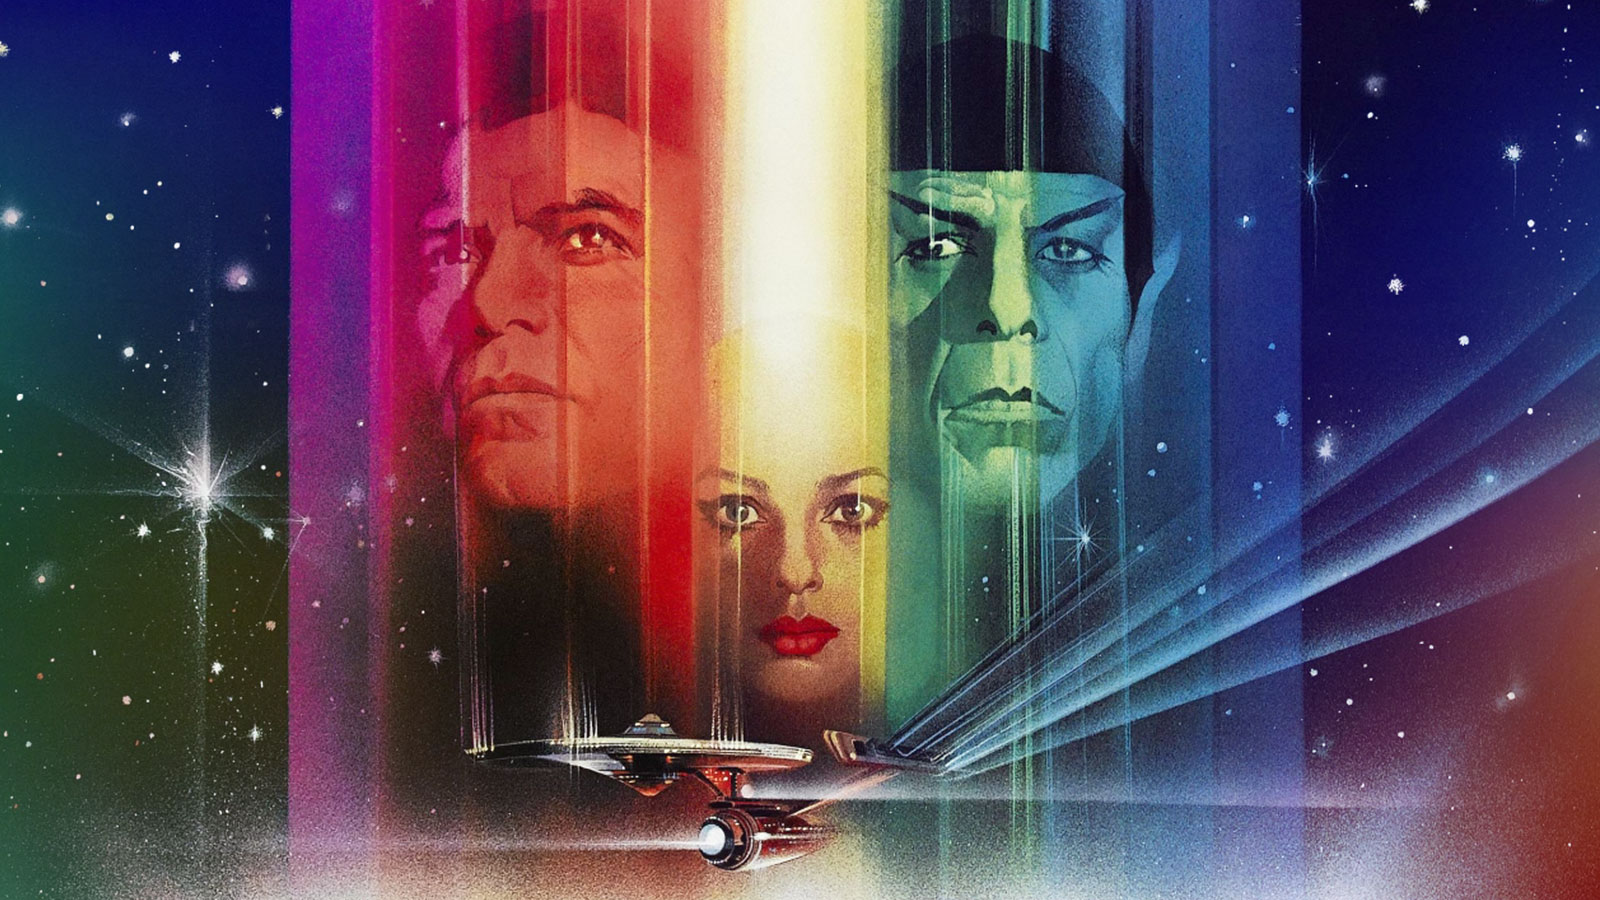 Star Trek: The Motion Picture 4K Director’s Cut to premiere April 5th on Paramount+